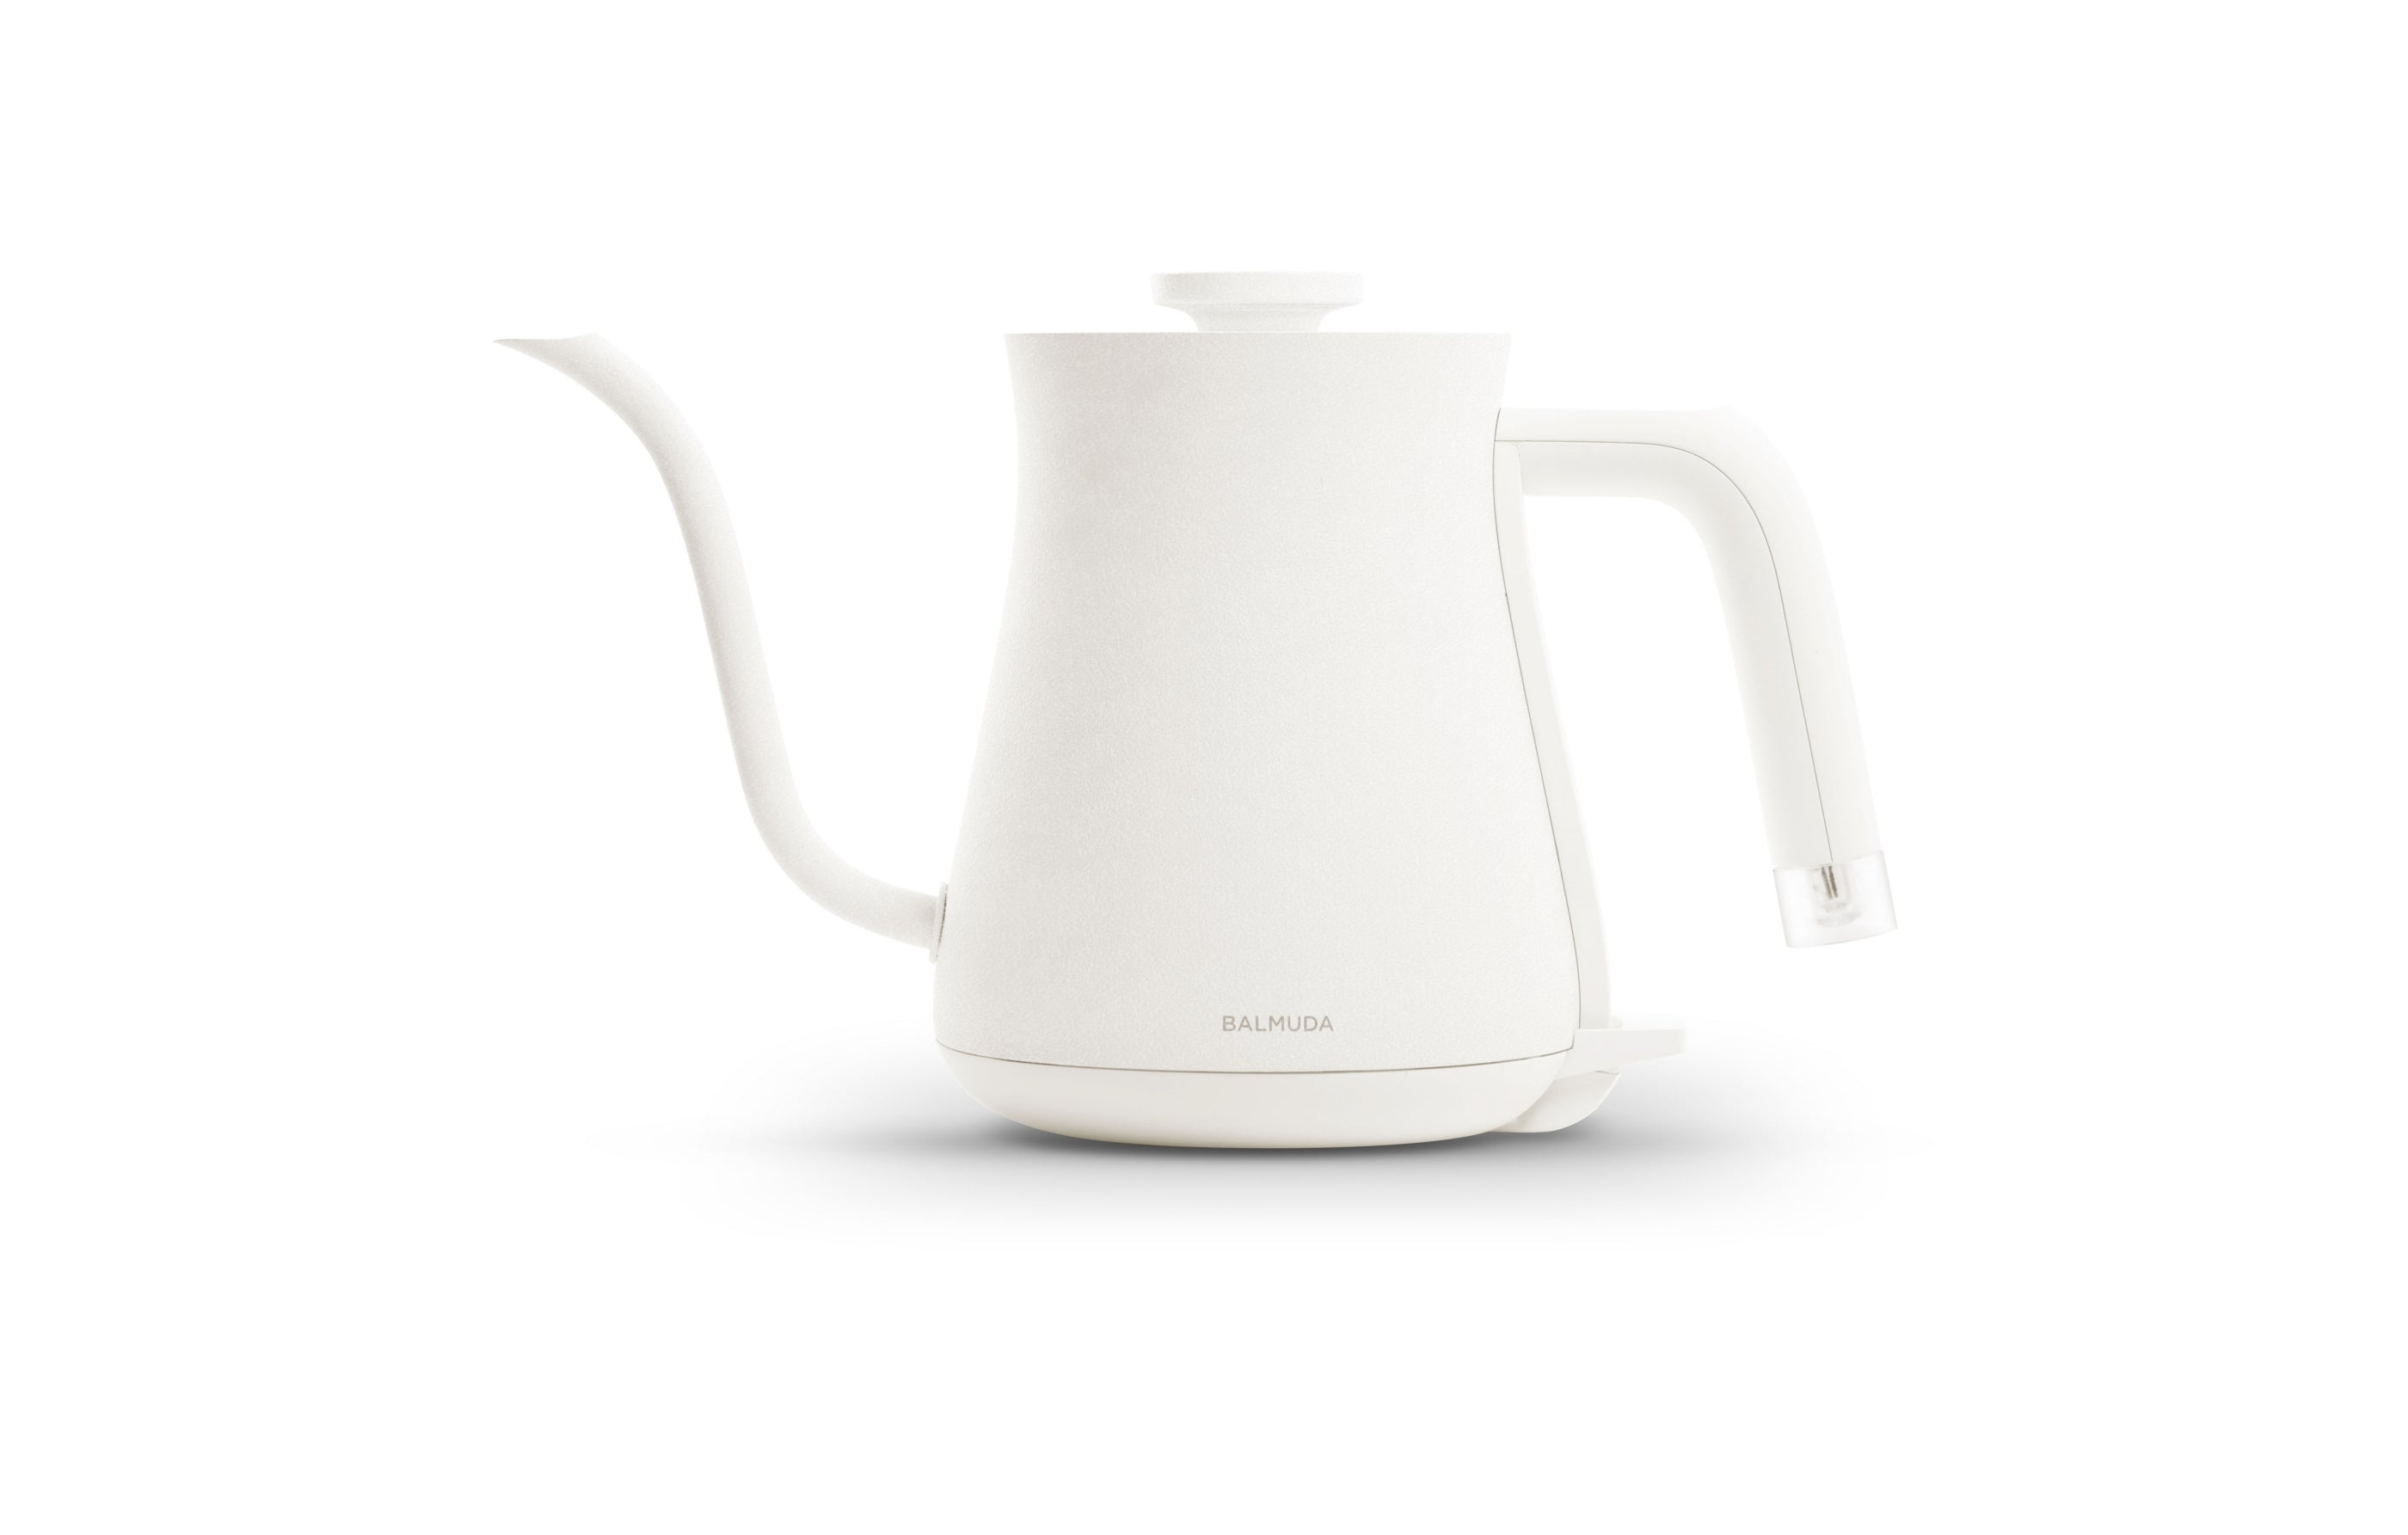 BALMUDA The Kettle features a sleek and compact design. It is